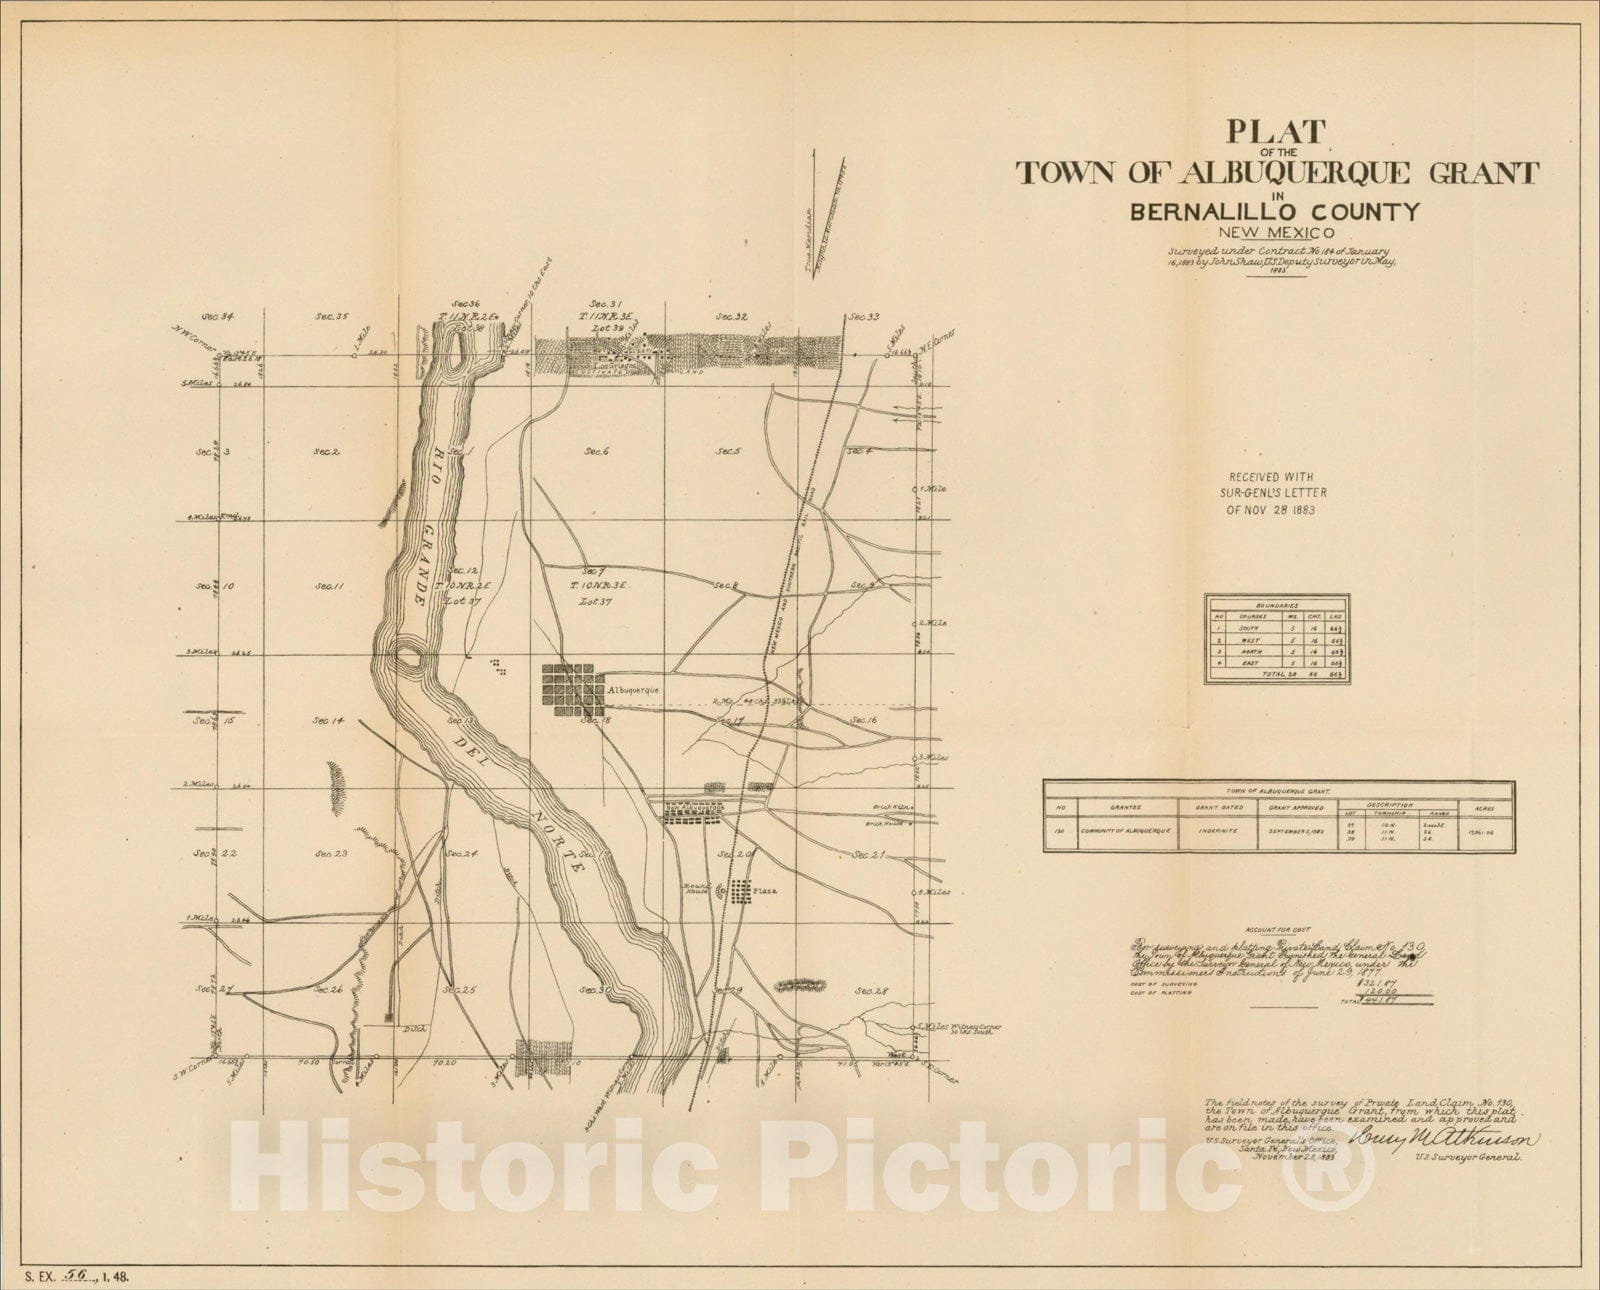 Historic Map : Plat of the Town of Albuquerque Grant In Bernalillo County New Mexico, 1883, U.S. Government Land Office, Vintage Wall Art